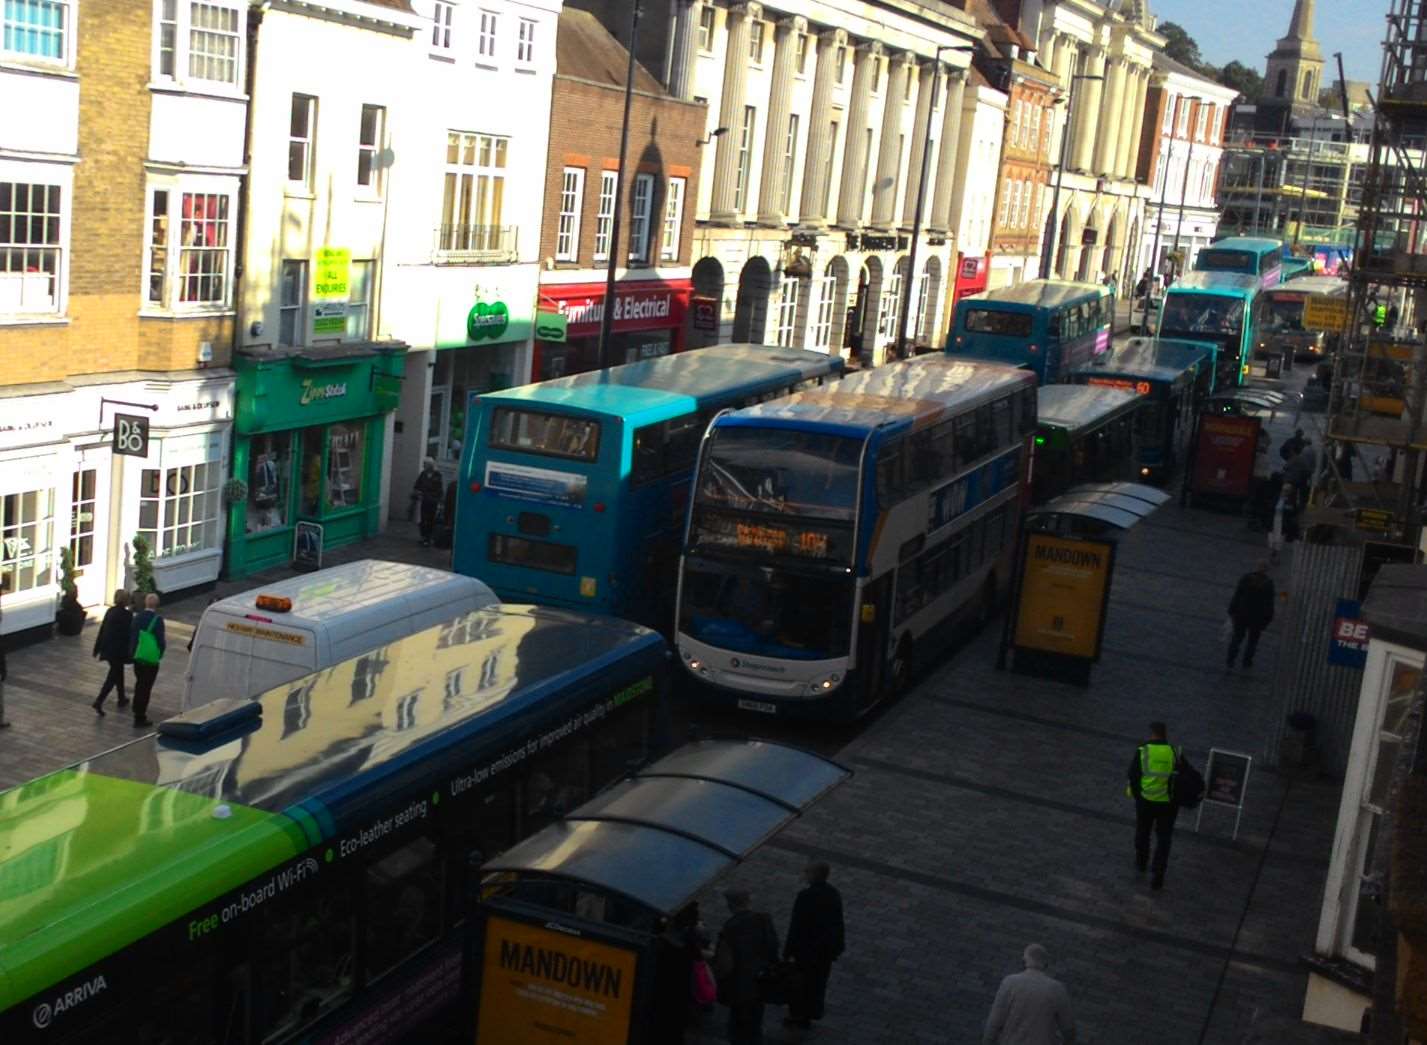 Thirteen buses were backed along High Street this morning